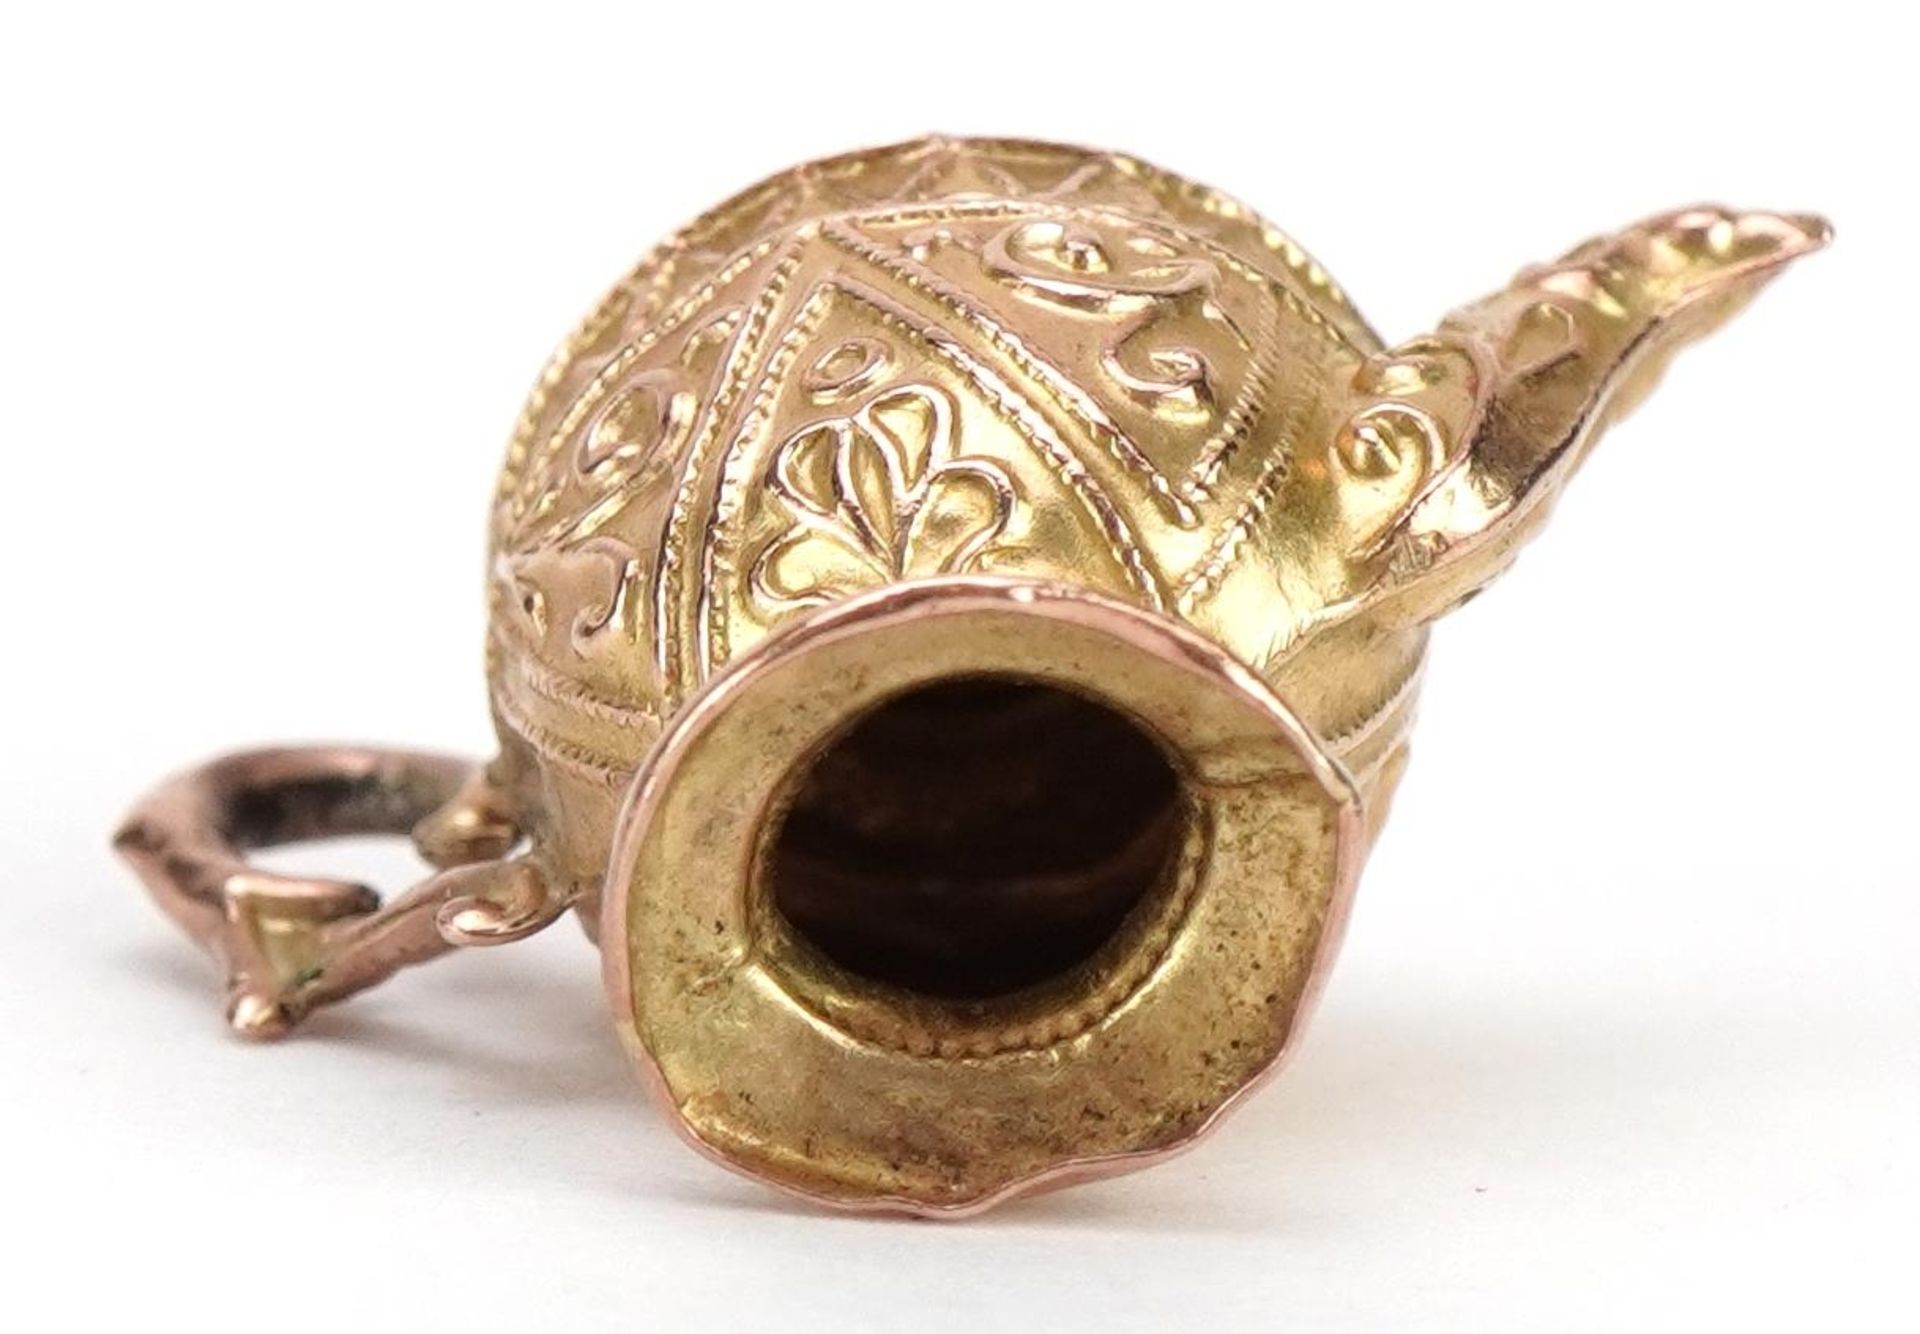 9ct gold teapot charm, 2.4cm wide, 0.9g - Image 3 of 4